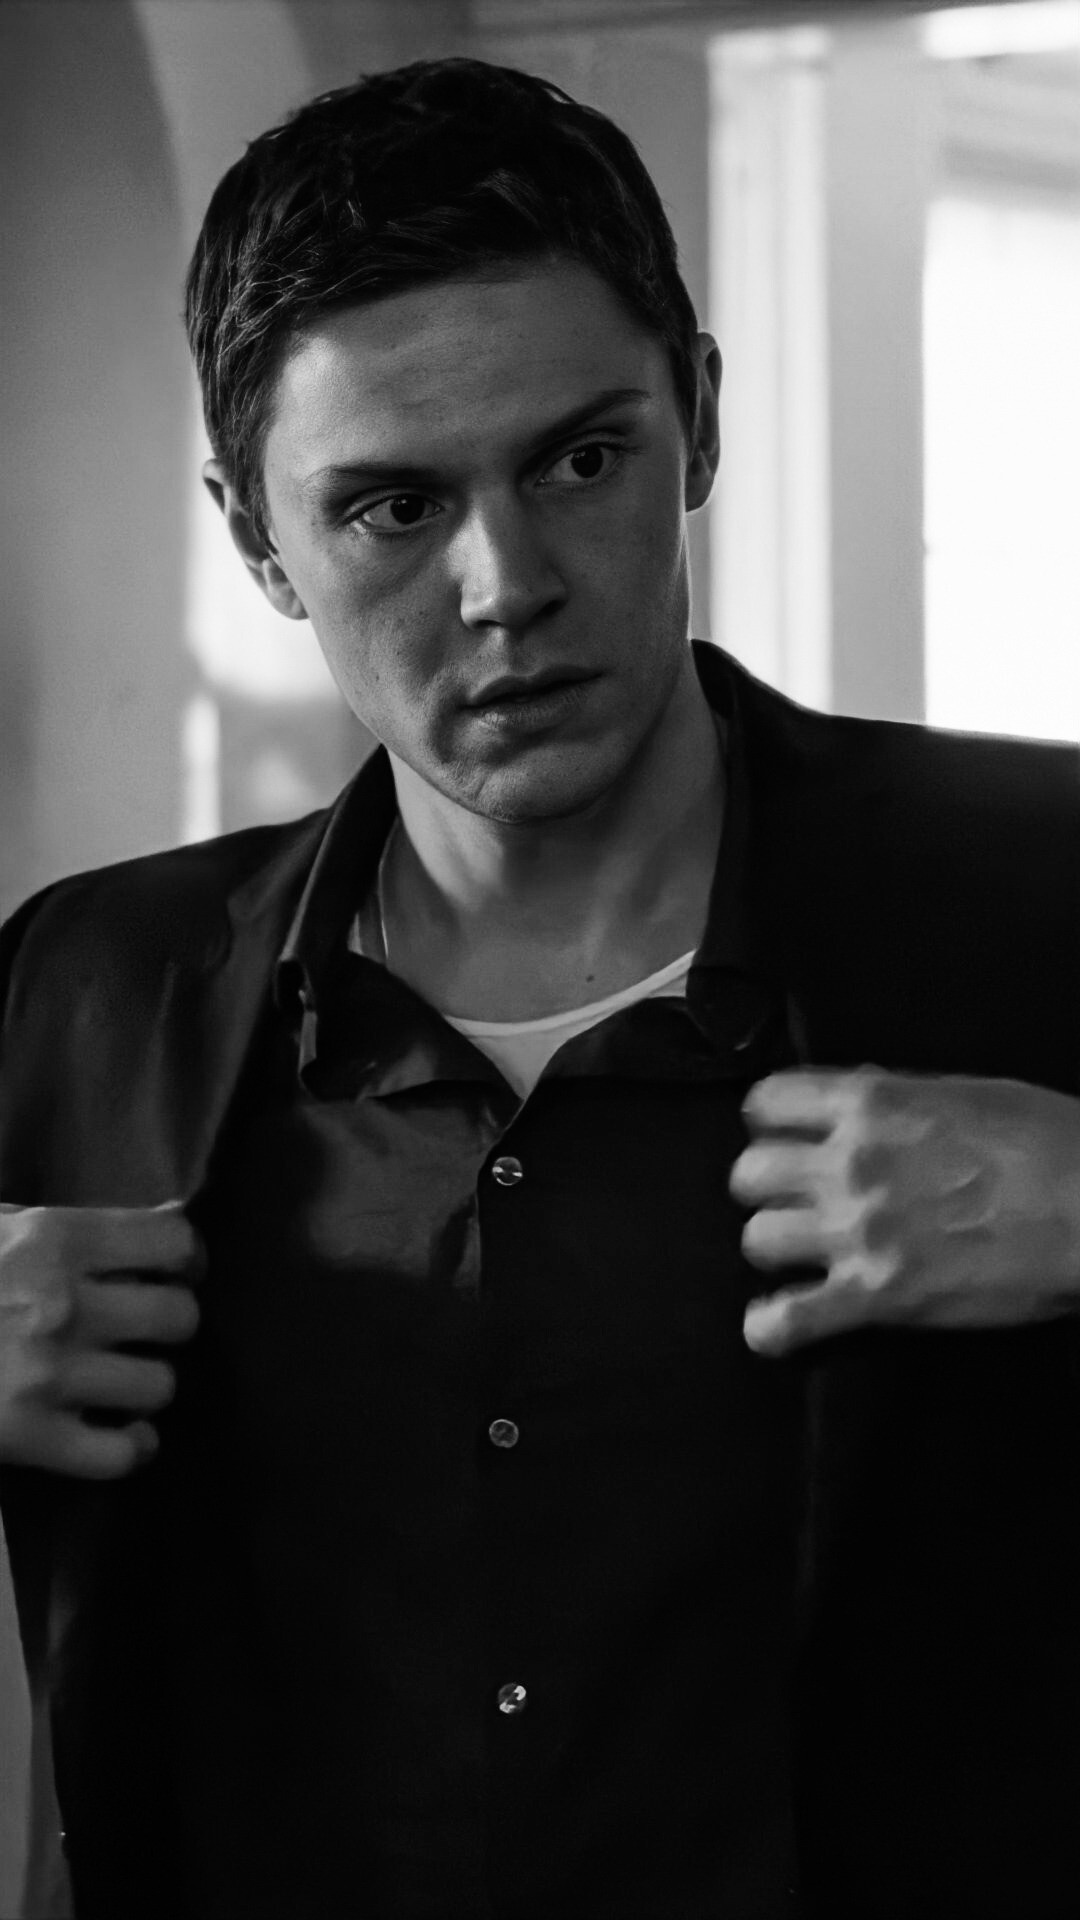 Mare of Easttown: Detective Colin Zabel played by Evan Thomas Peters, An American actor. 1080x1920 Full HD Wallpaper.